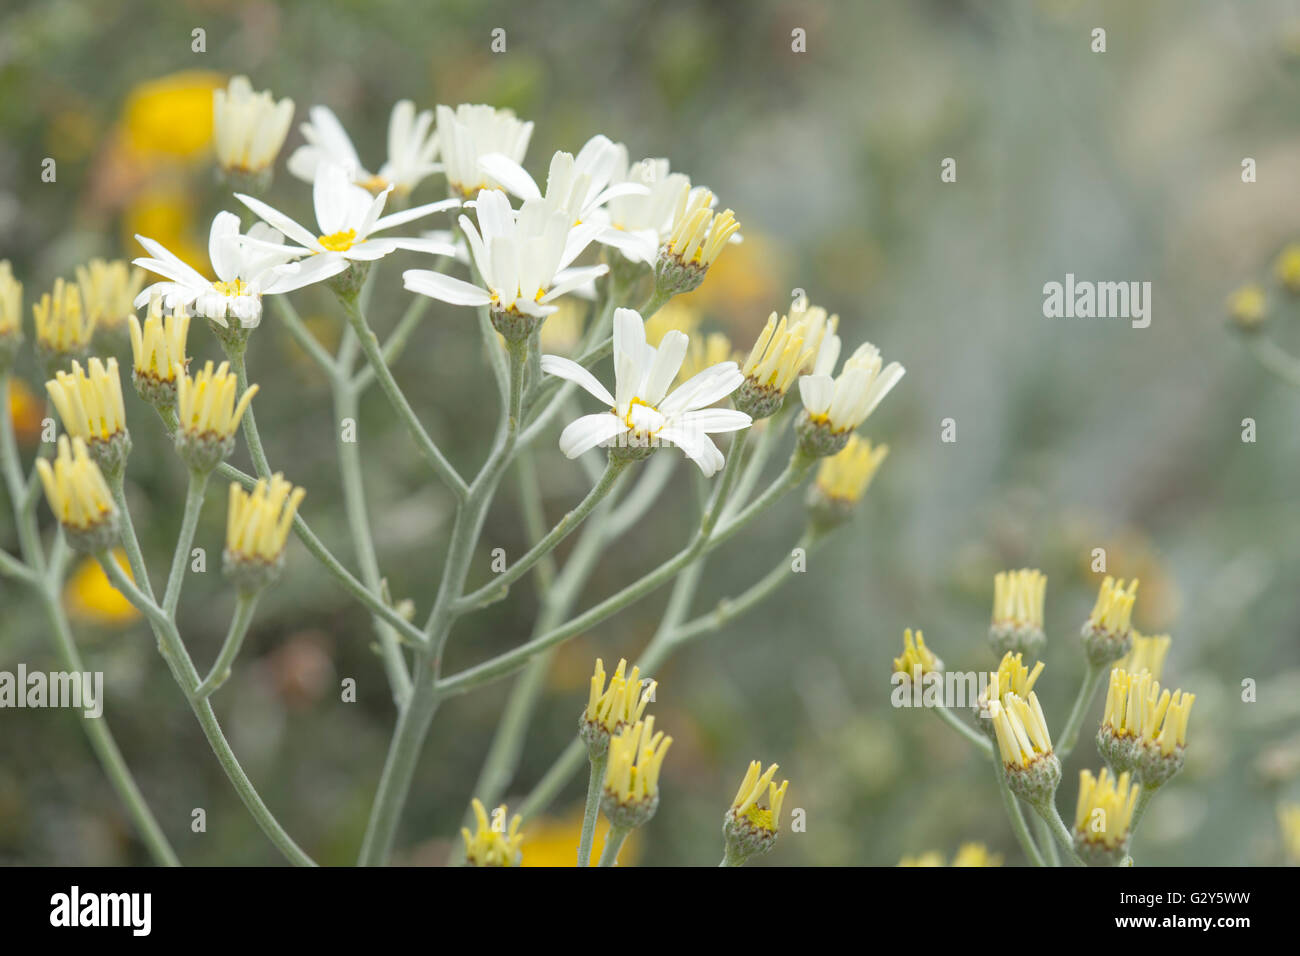 Flora of Gran Canaria - Tanacetum ptarmiciflorum, silver leaf plant, endemic to the islands and endangered, blooming starts Stock Photo